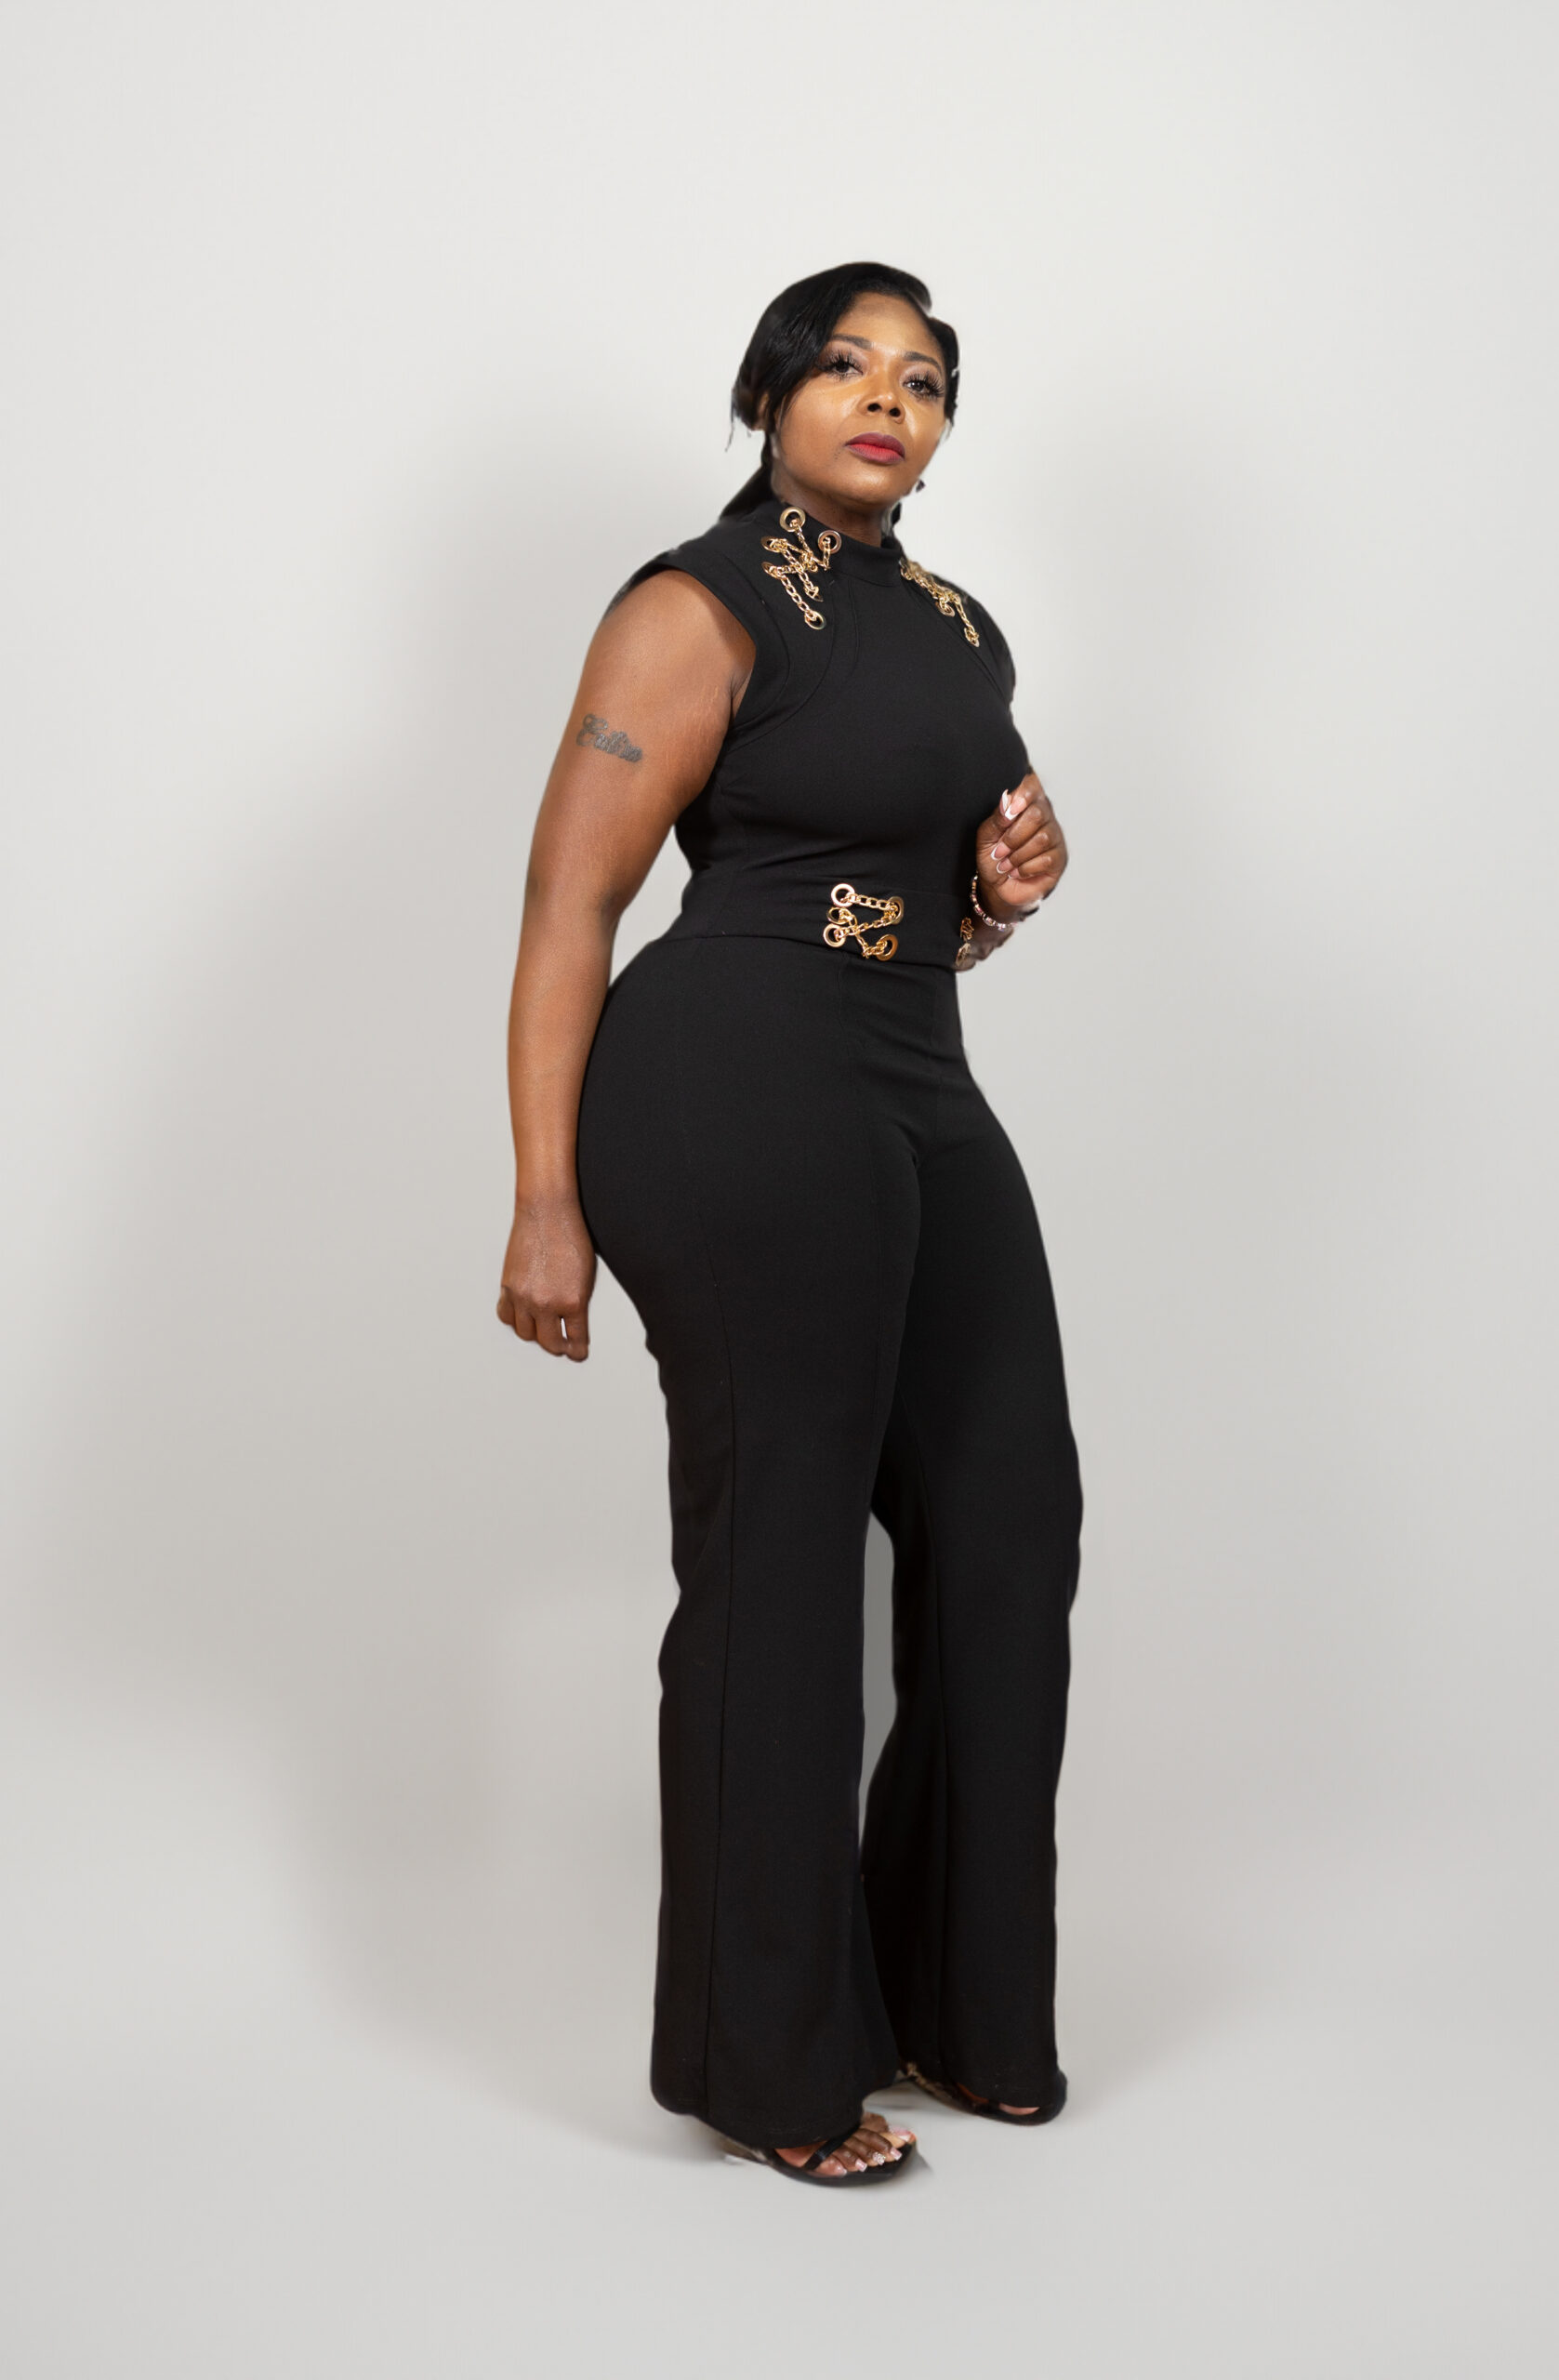 Black and Gold Jumpsuit (Size XL) - SOLD | Charlotte B Closet